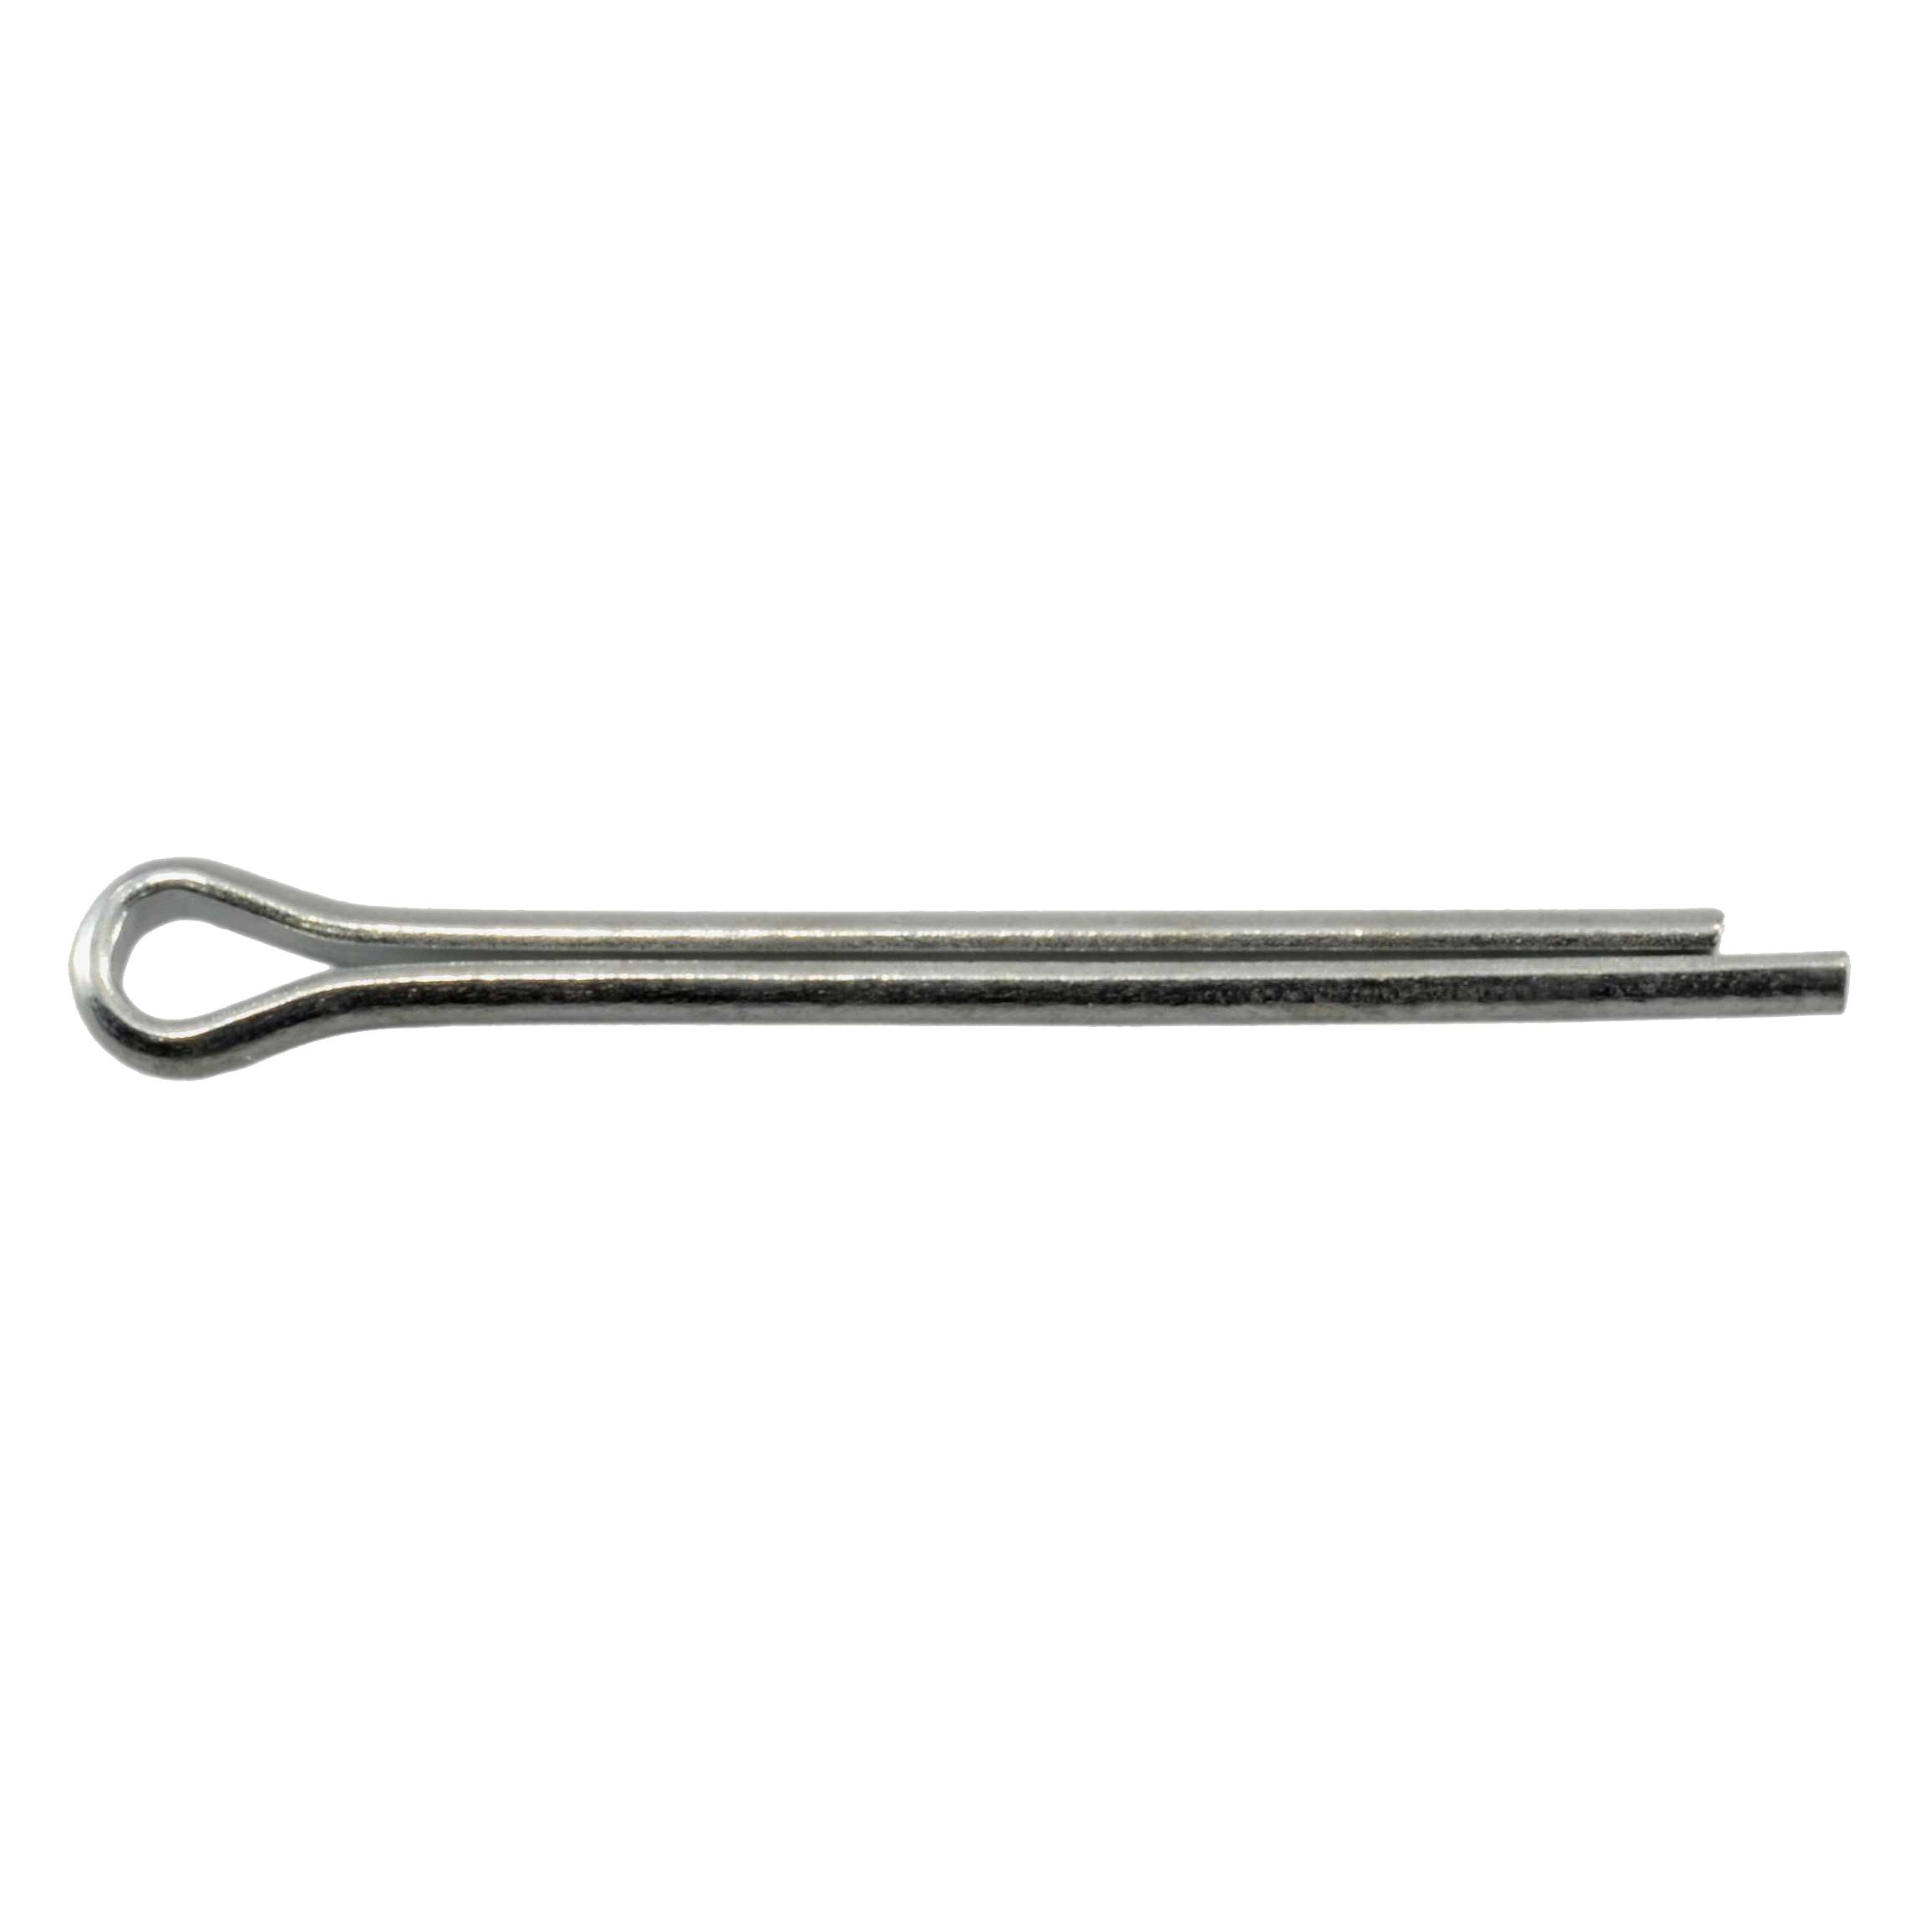 1/8X1-3/4 COTTER PIN EXTENDED PRONG STEEL ZINC PLATED 40 